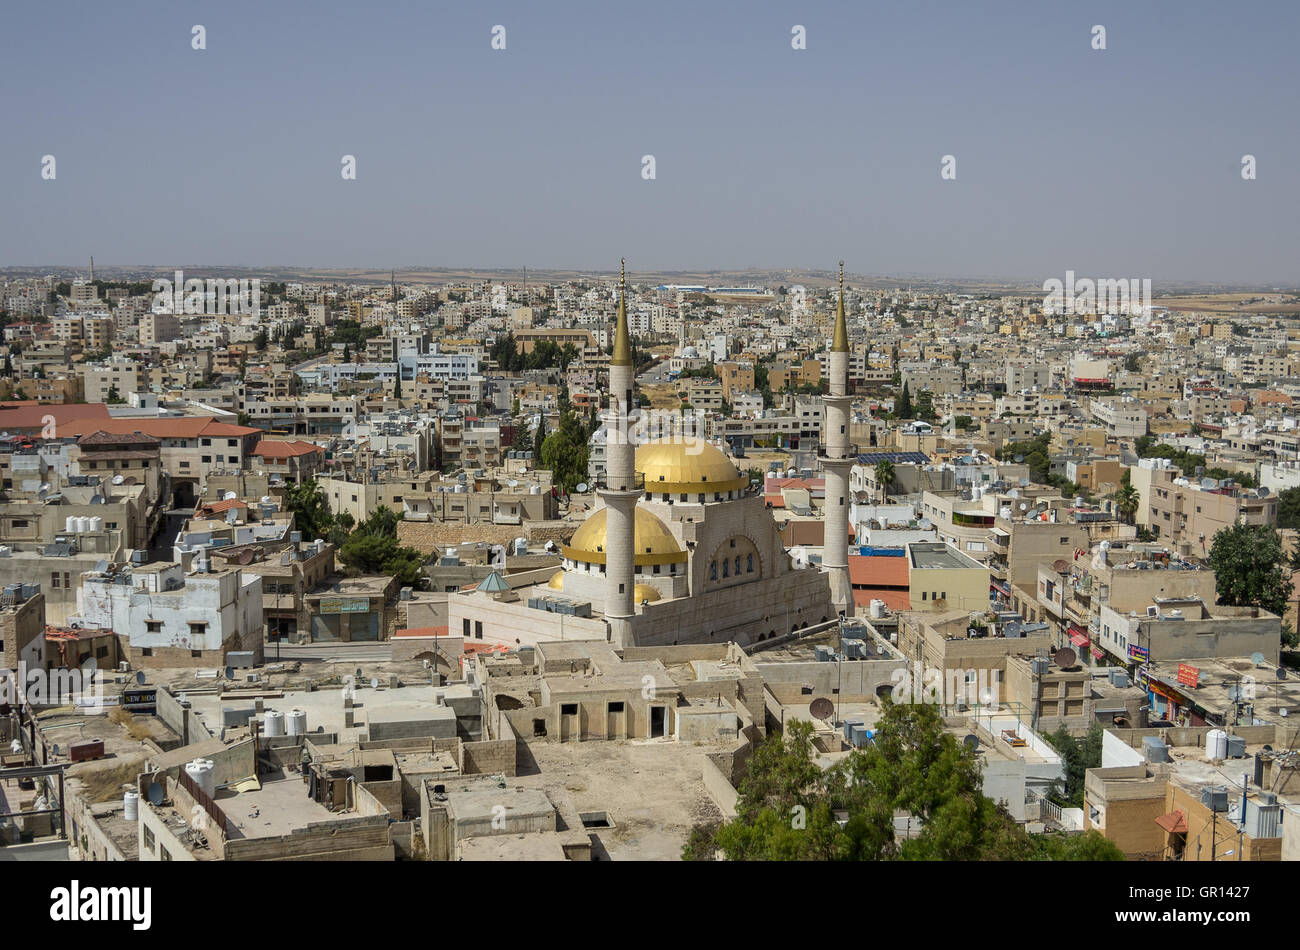 Madaba, Jordan - June 3, 2016: Panoramic view over the town center of Madaba in Jordan with the Central Mosque Stock Photo